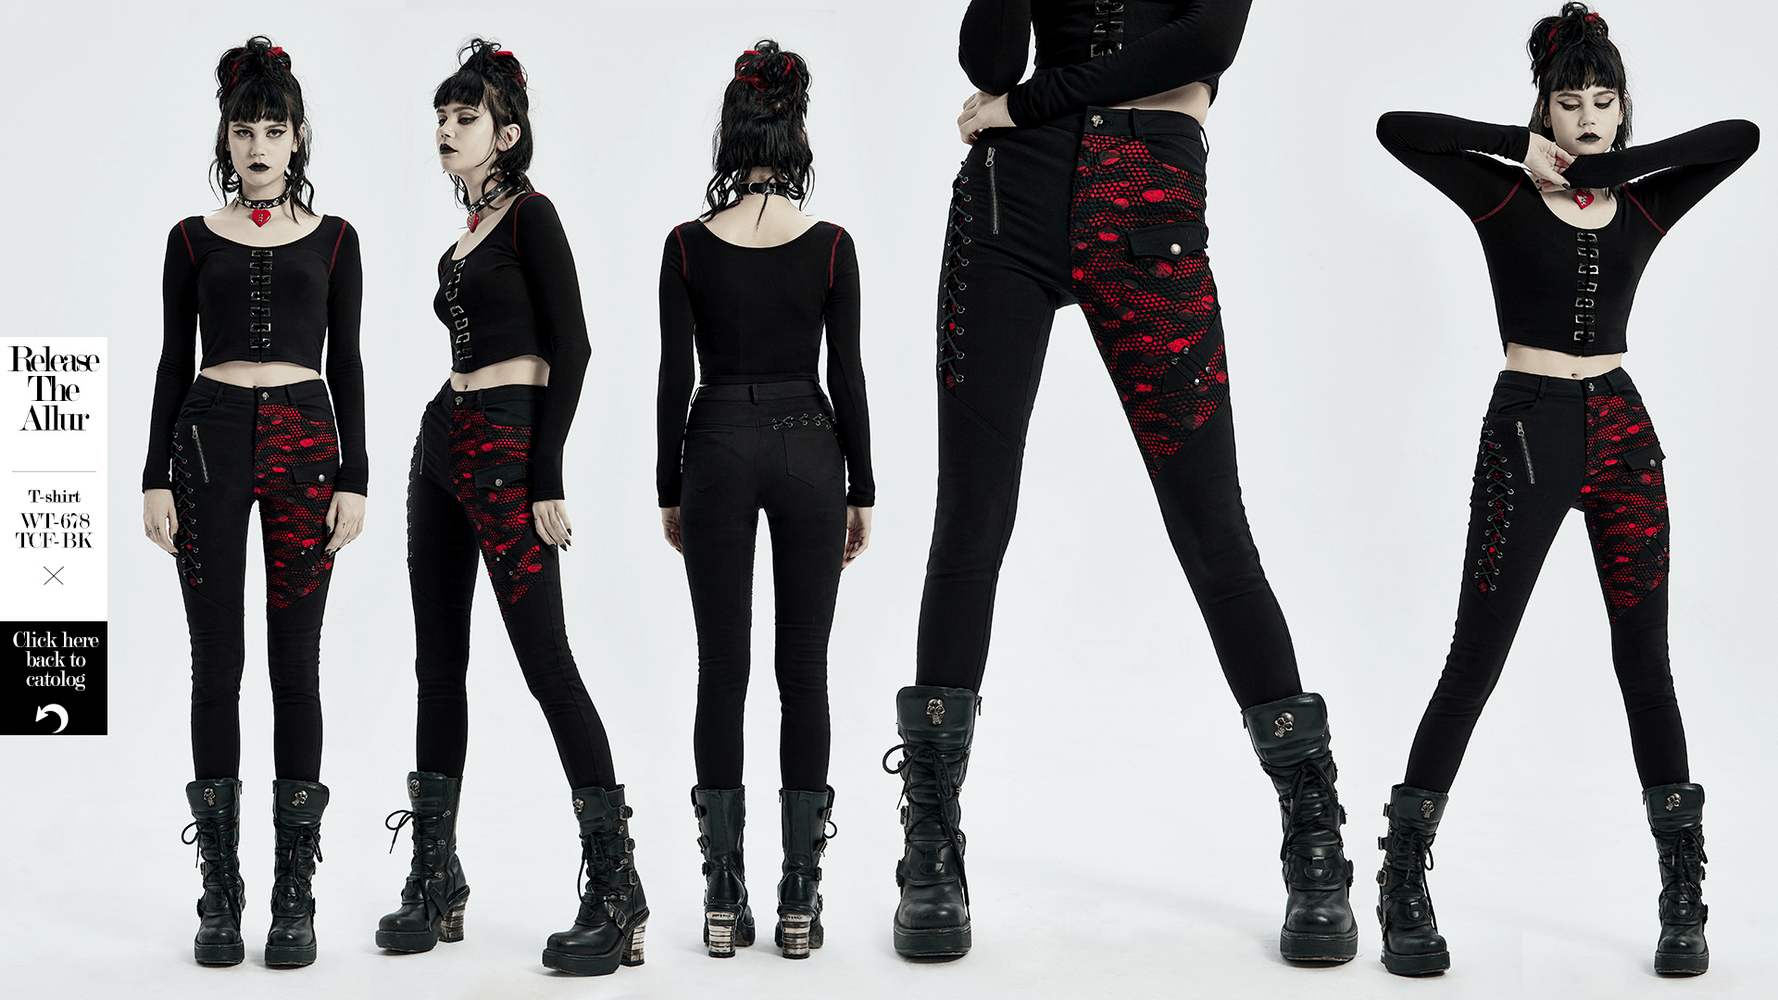 Stylish Black Gothic Trousers with Red Lace-Up Sides